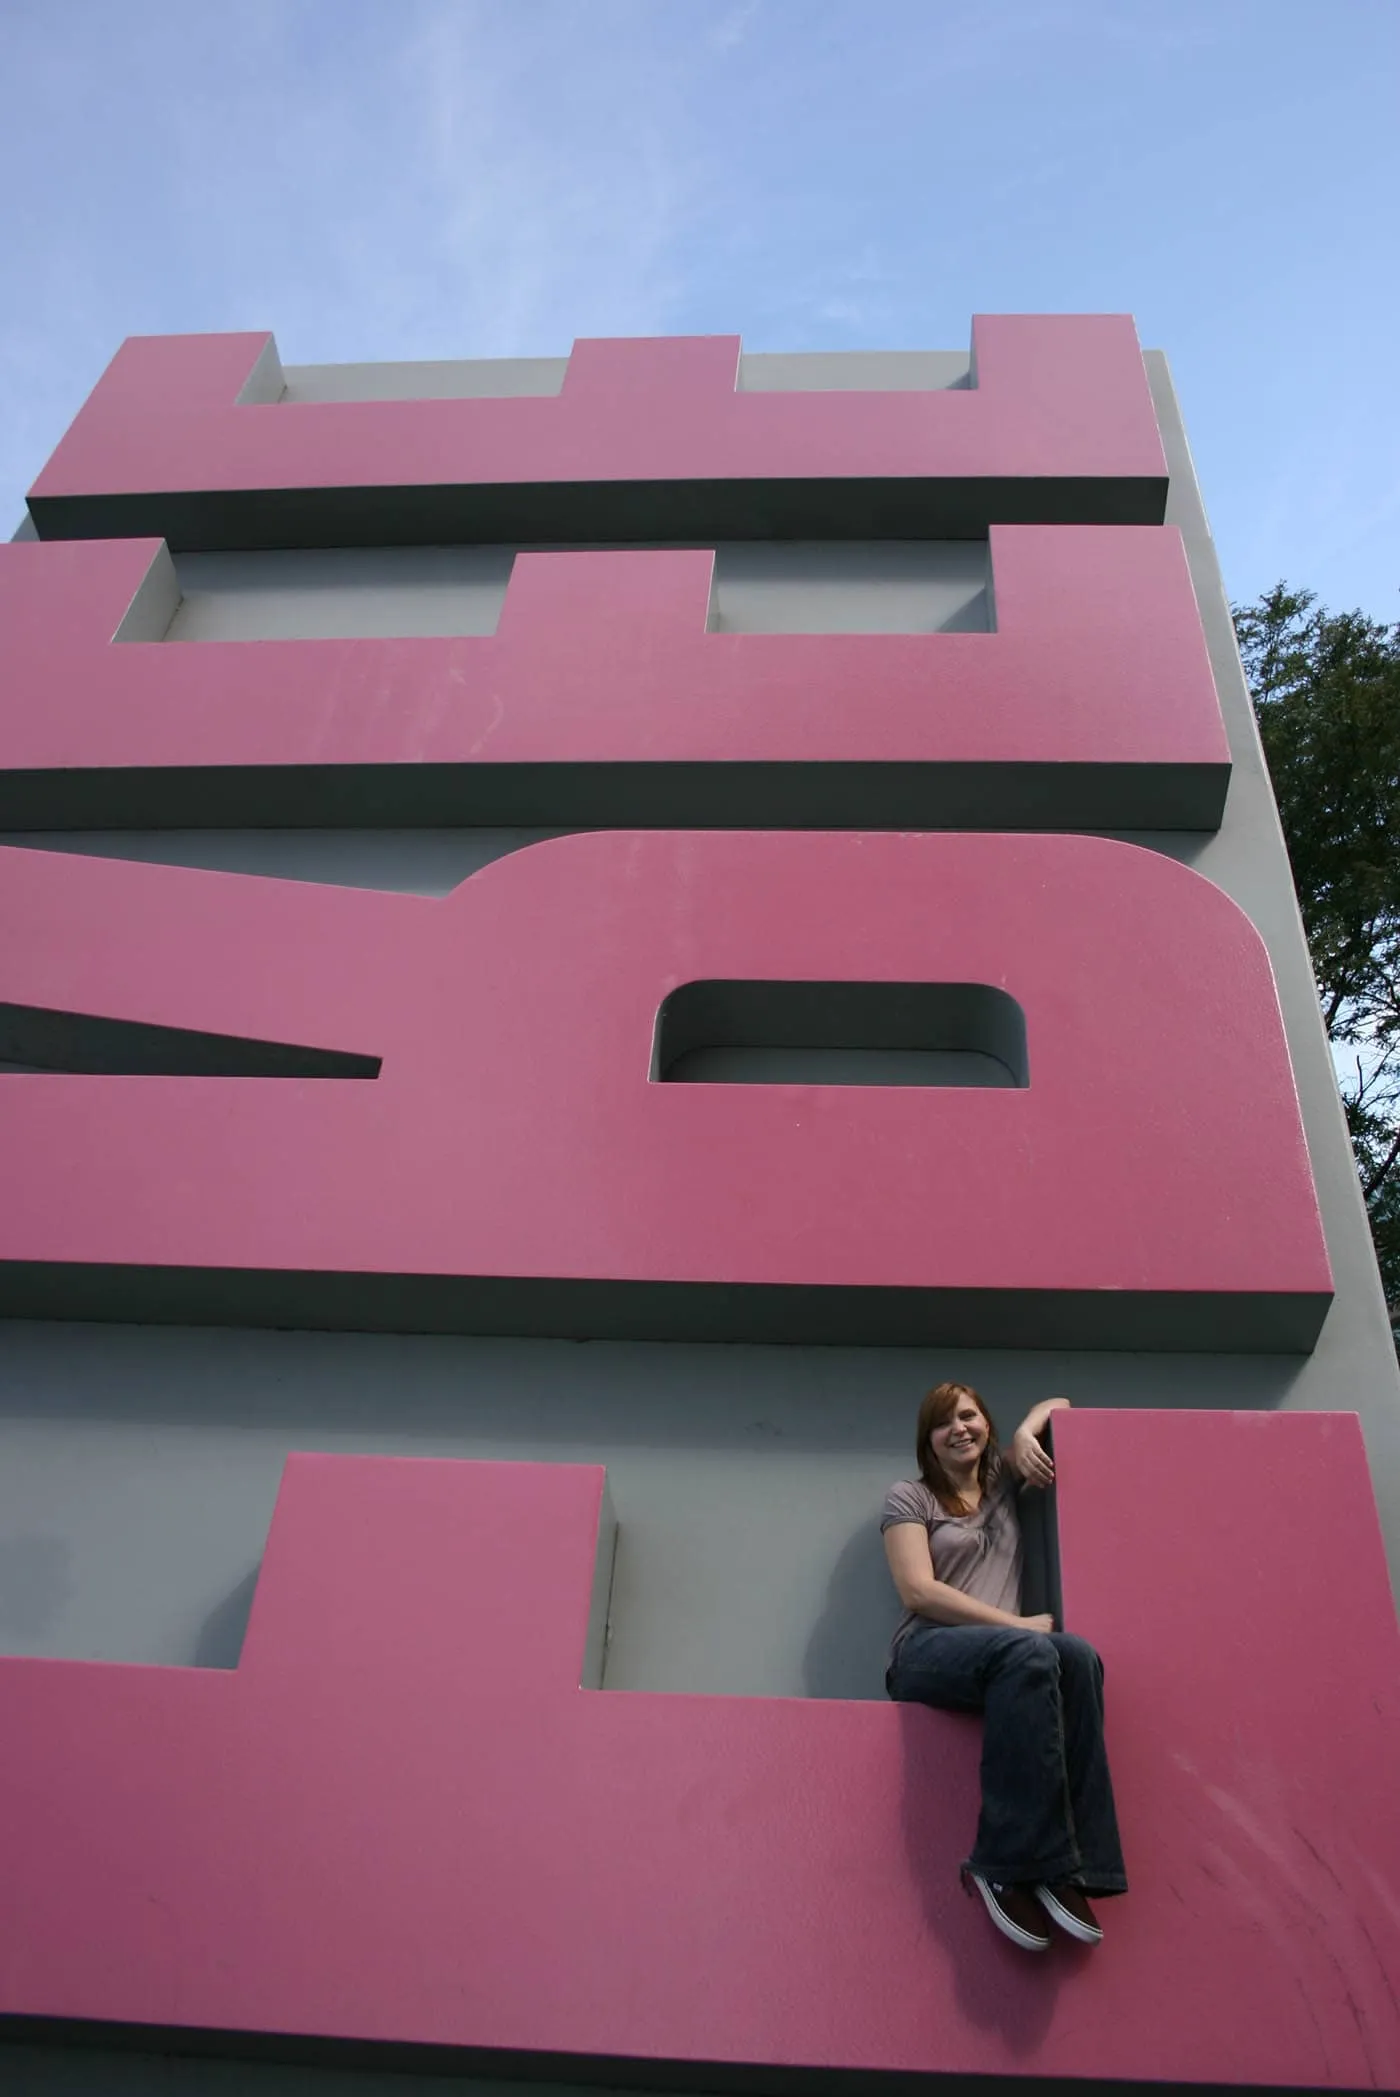 World's Largest Rubber Stamp (FREE Stamp) in Cleveland, Ohio